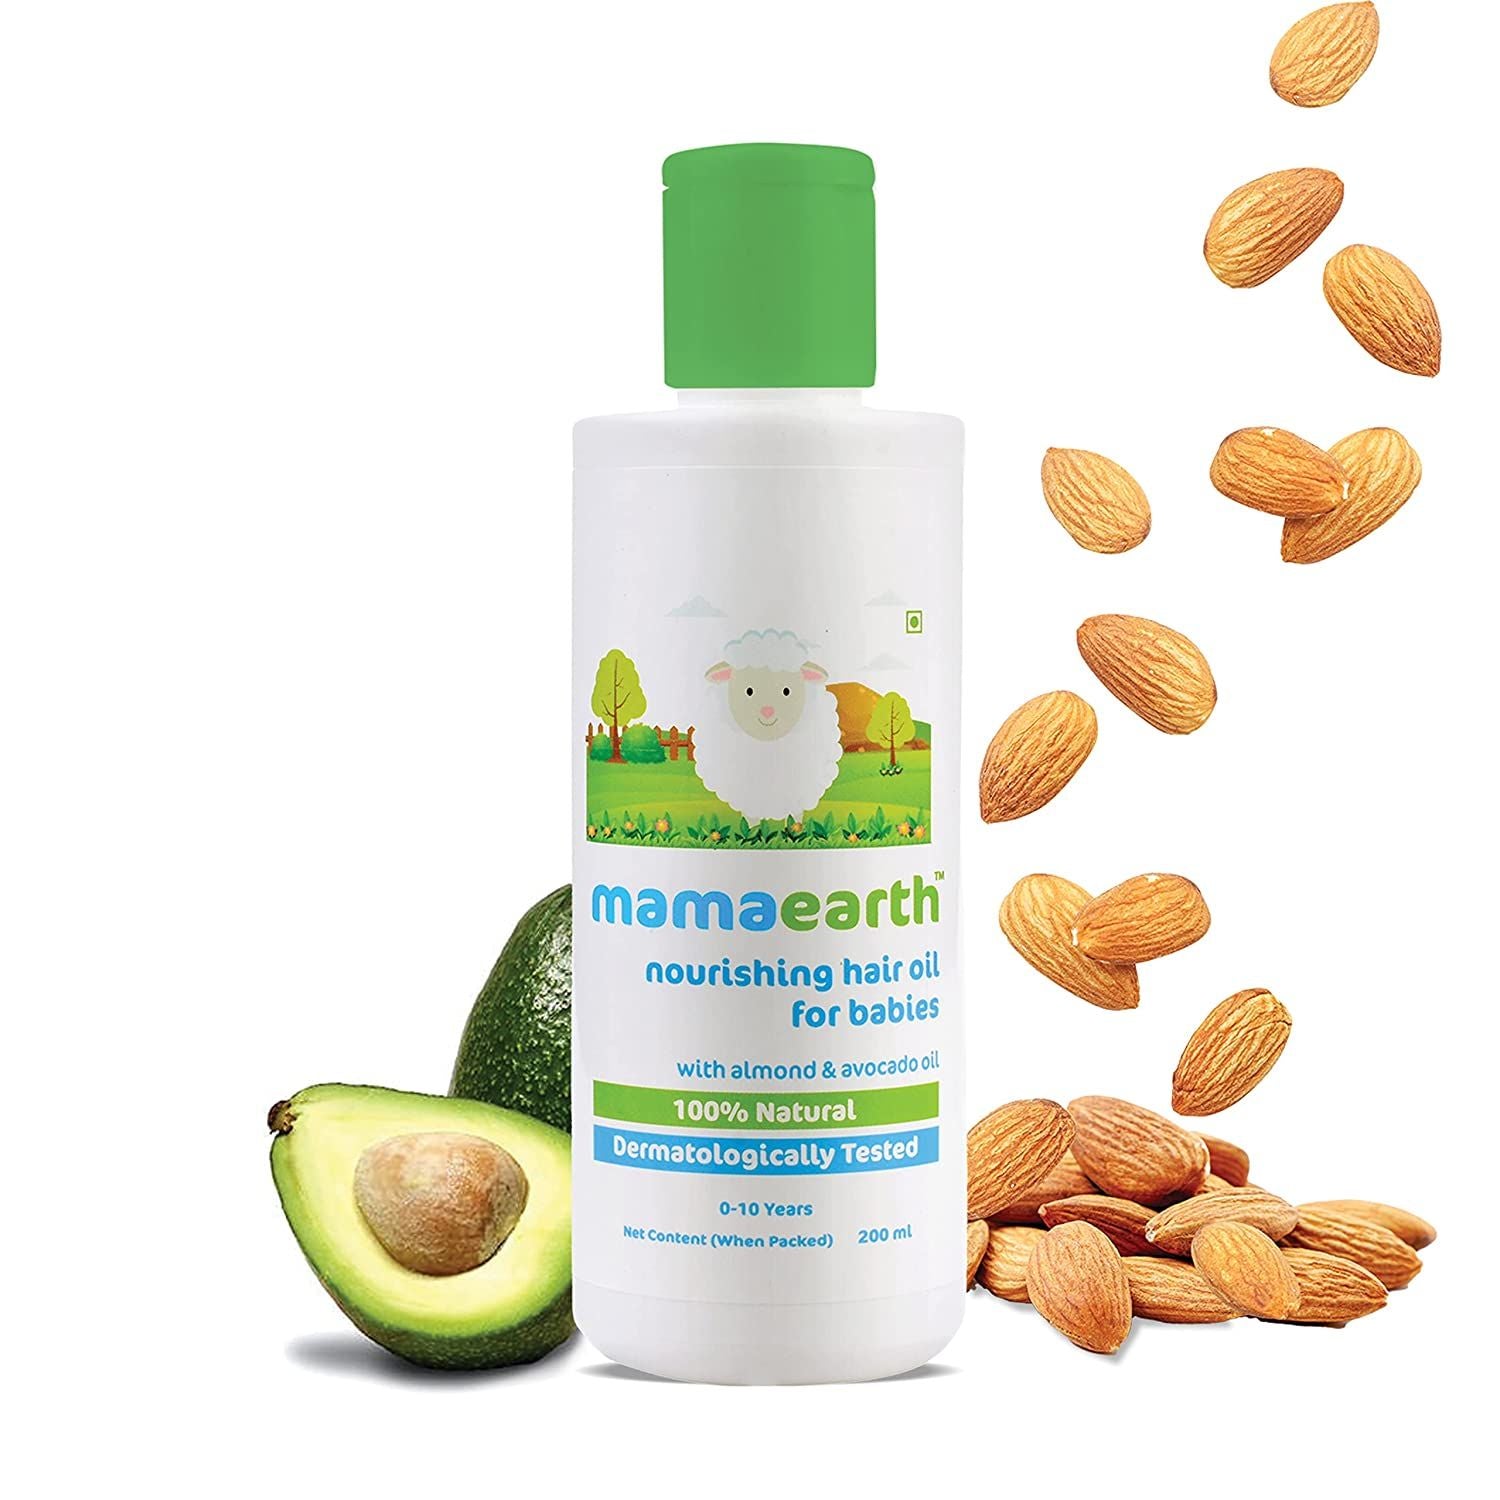 Nourishing Hair Oil for Babies with Almond and Avocado Oil - 200 ml